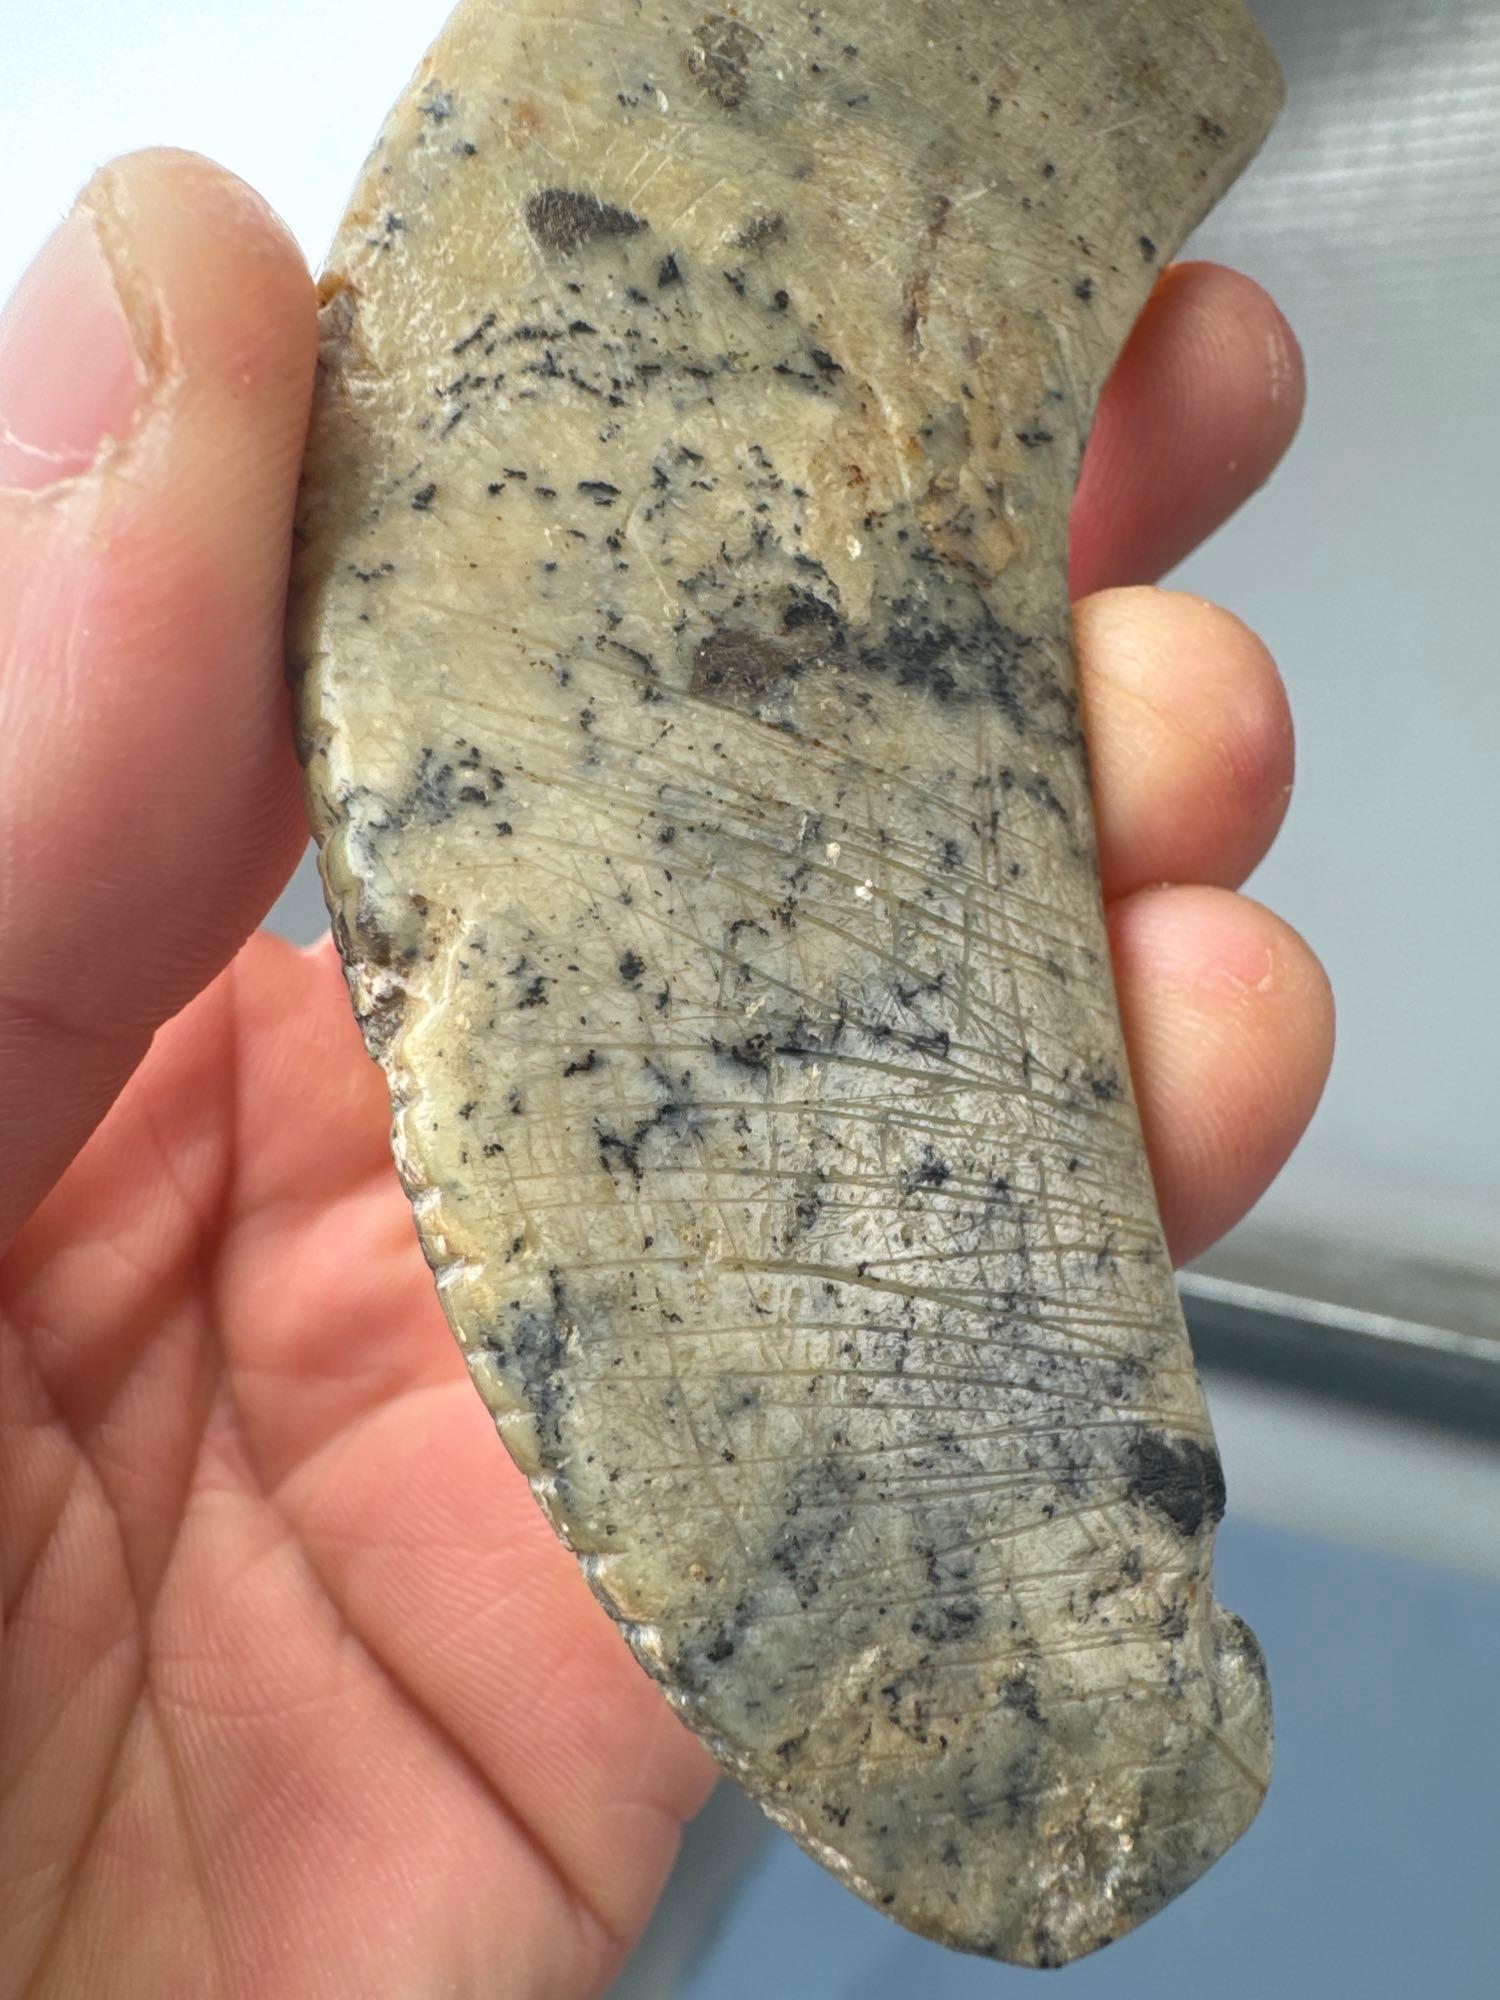 SUPERB 4 5/8" THIN Crescent Bannerstone Tie-On, Found in Monroe Co., PA, Beautiful Chlorite Material